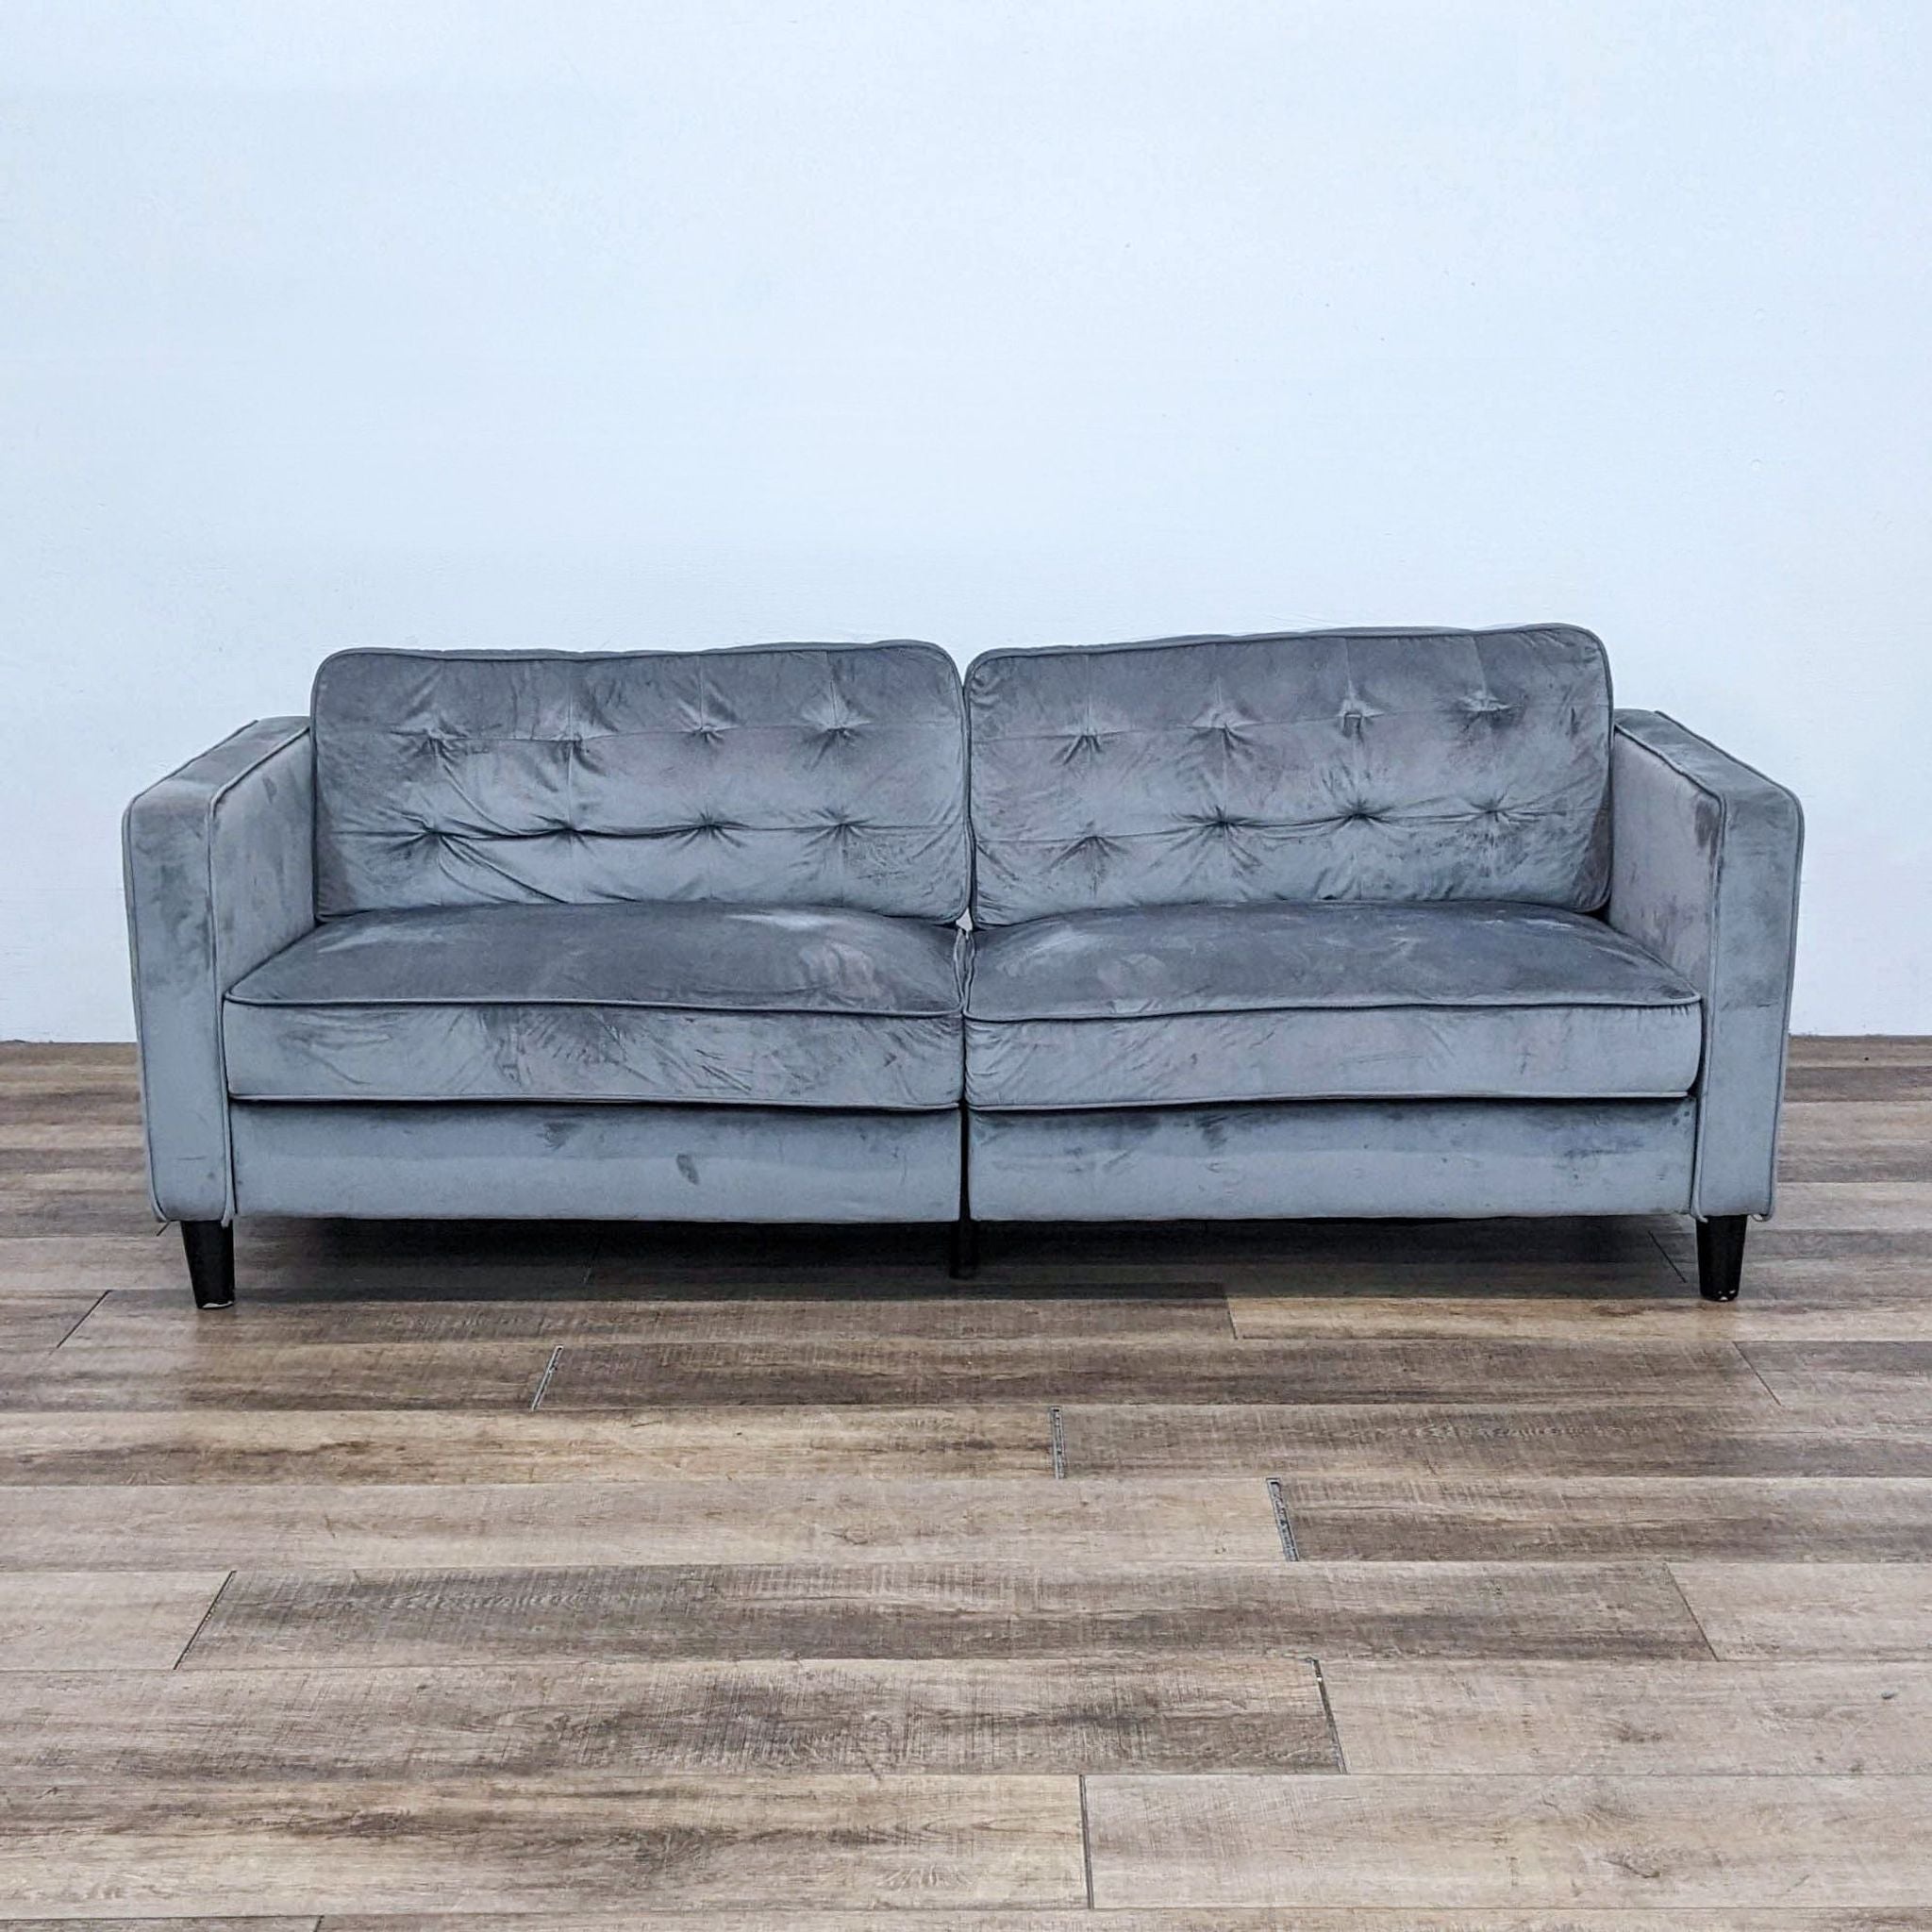 Reperch 3-seat tufted back sofa with two cushions and track arms, dark feet, front view on wooden floor.